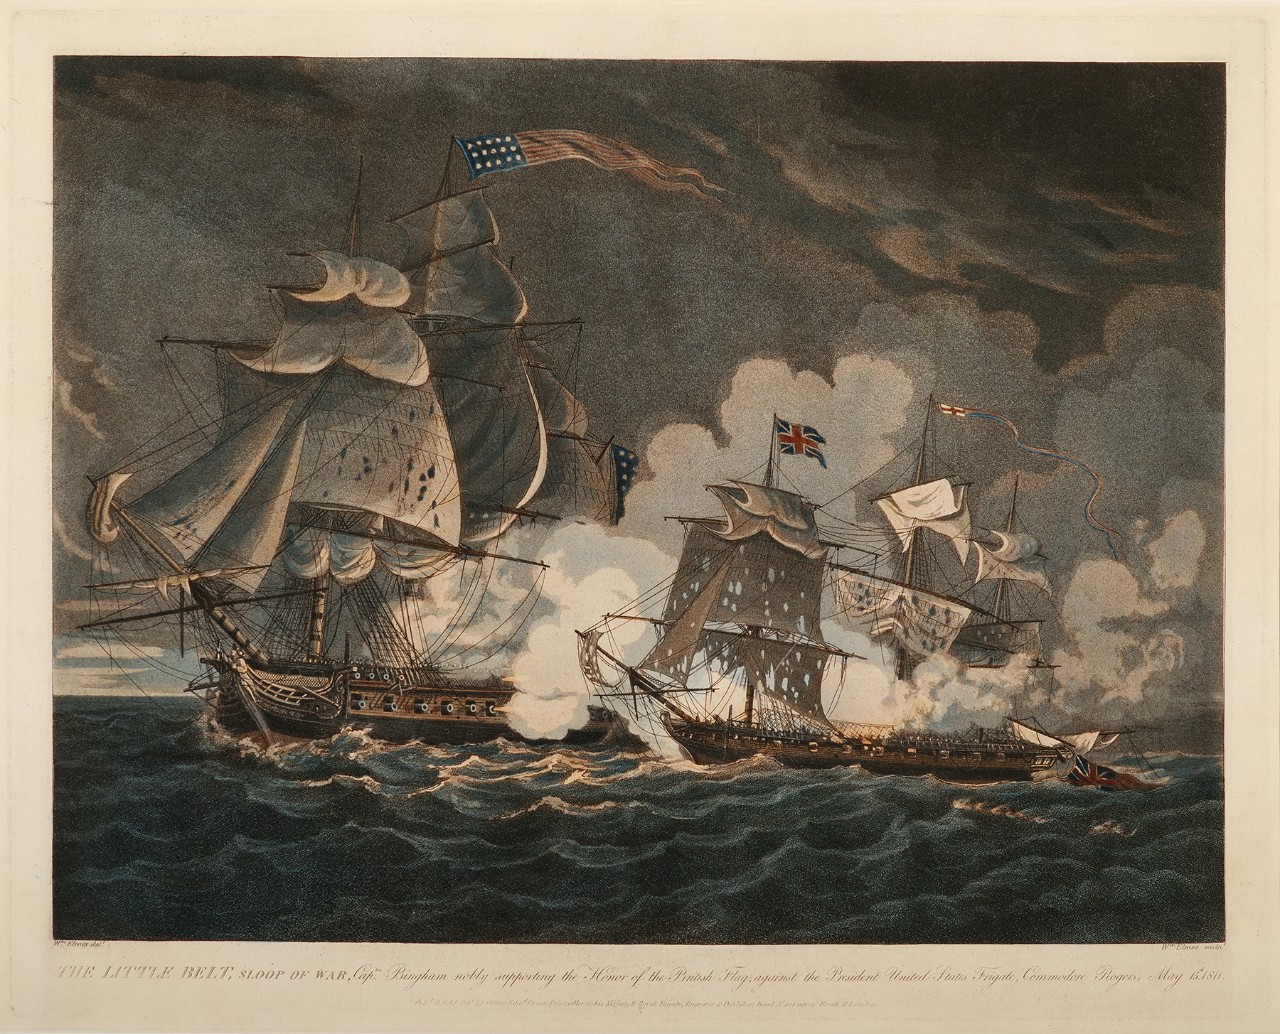 The Little Belt Sloop of War, Captain Bingham Nobly Supporting the Honor of the British Flag Against the President United States Frigate, Commodore Rodgers, May 15th 1811